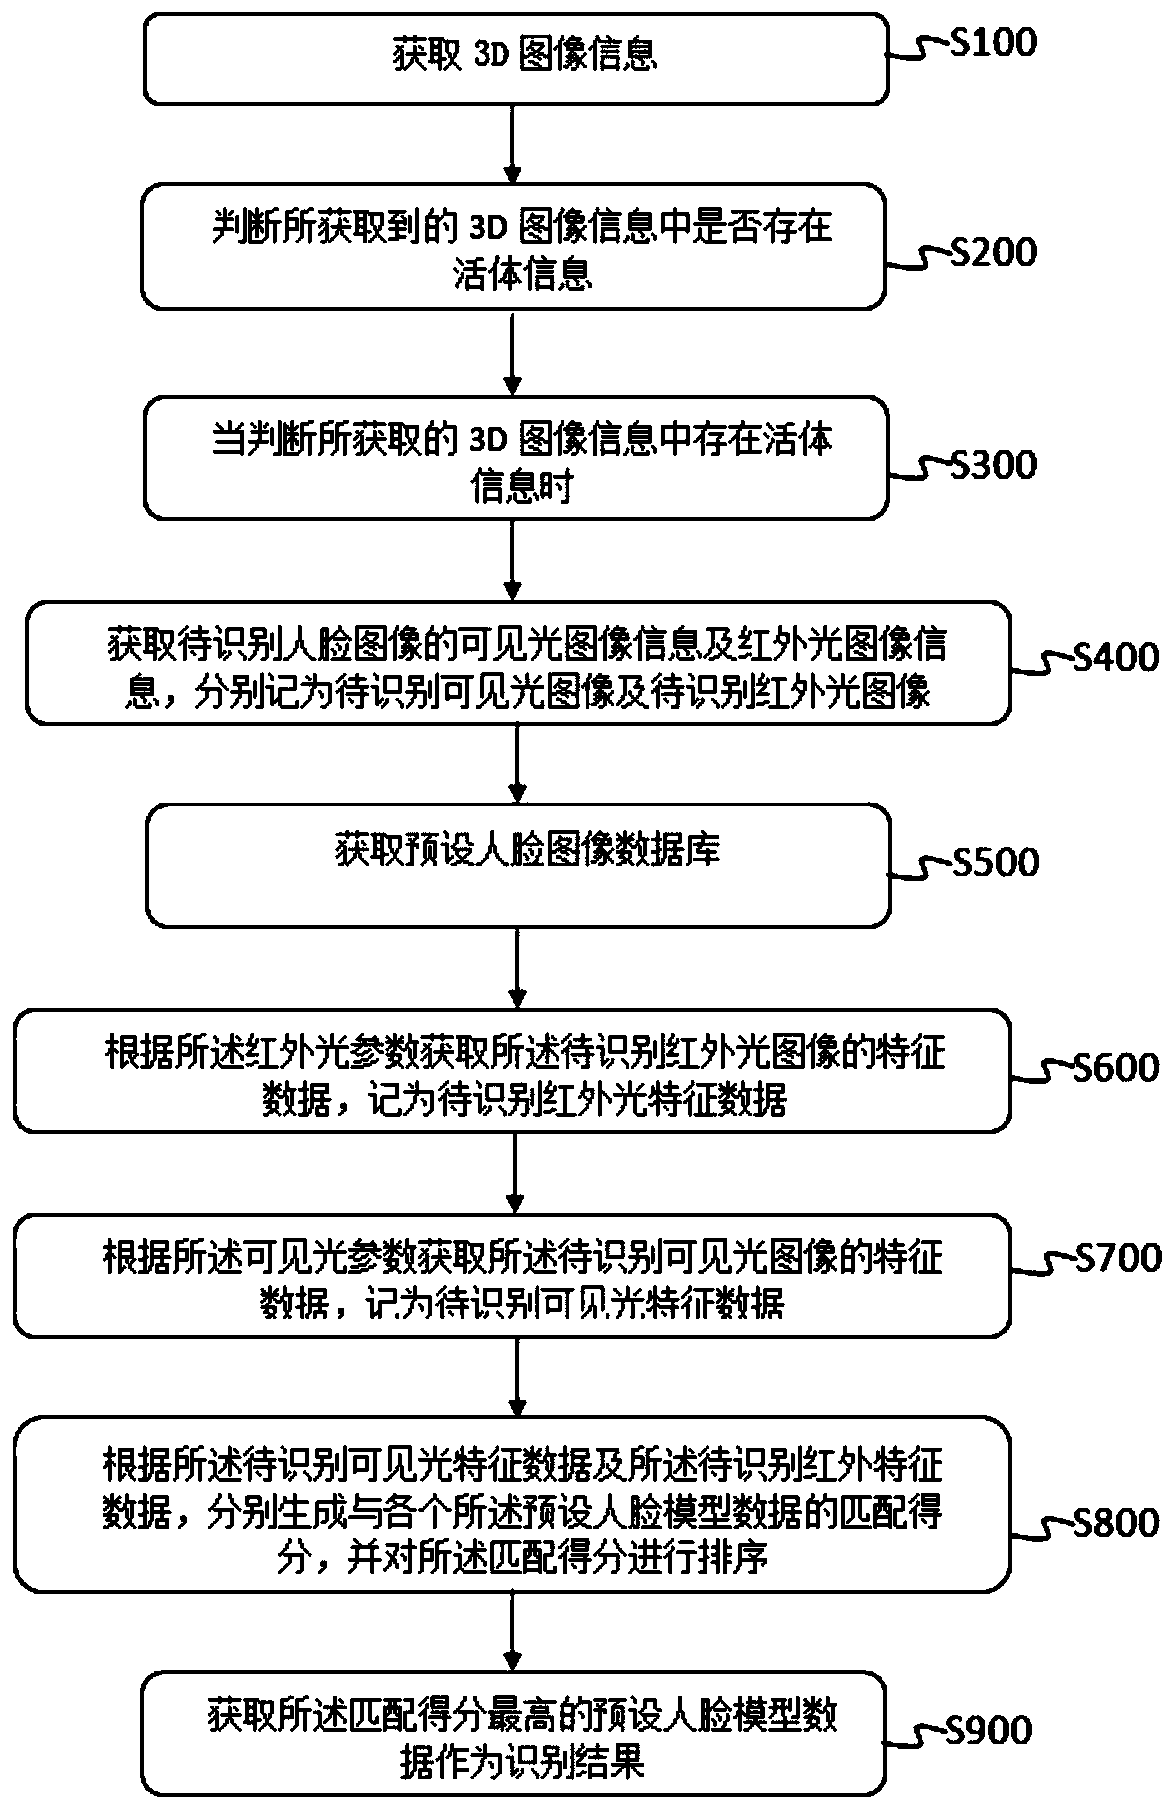 Face recognition method and system combining 3D structured light, infrared light and visible light